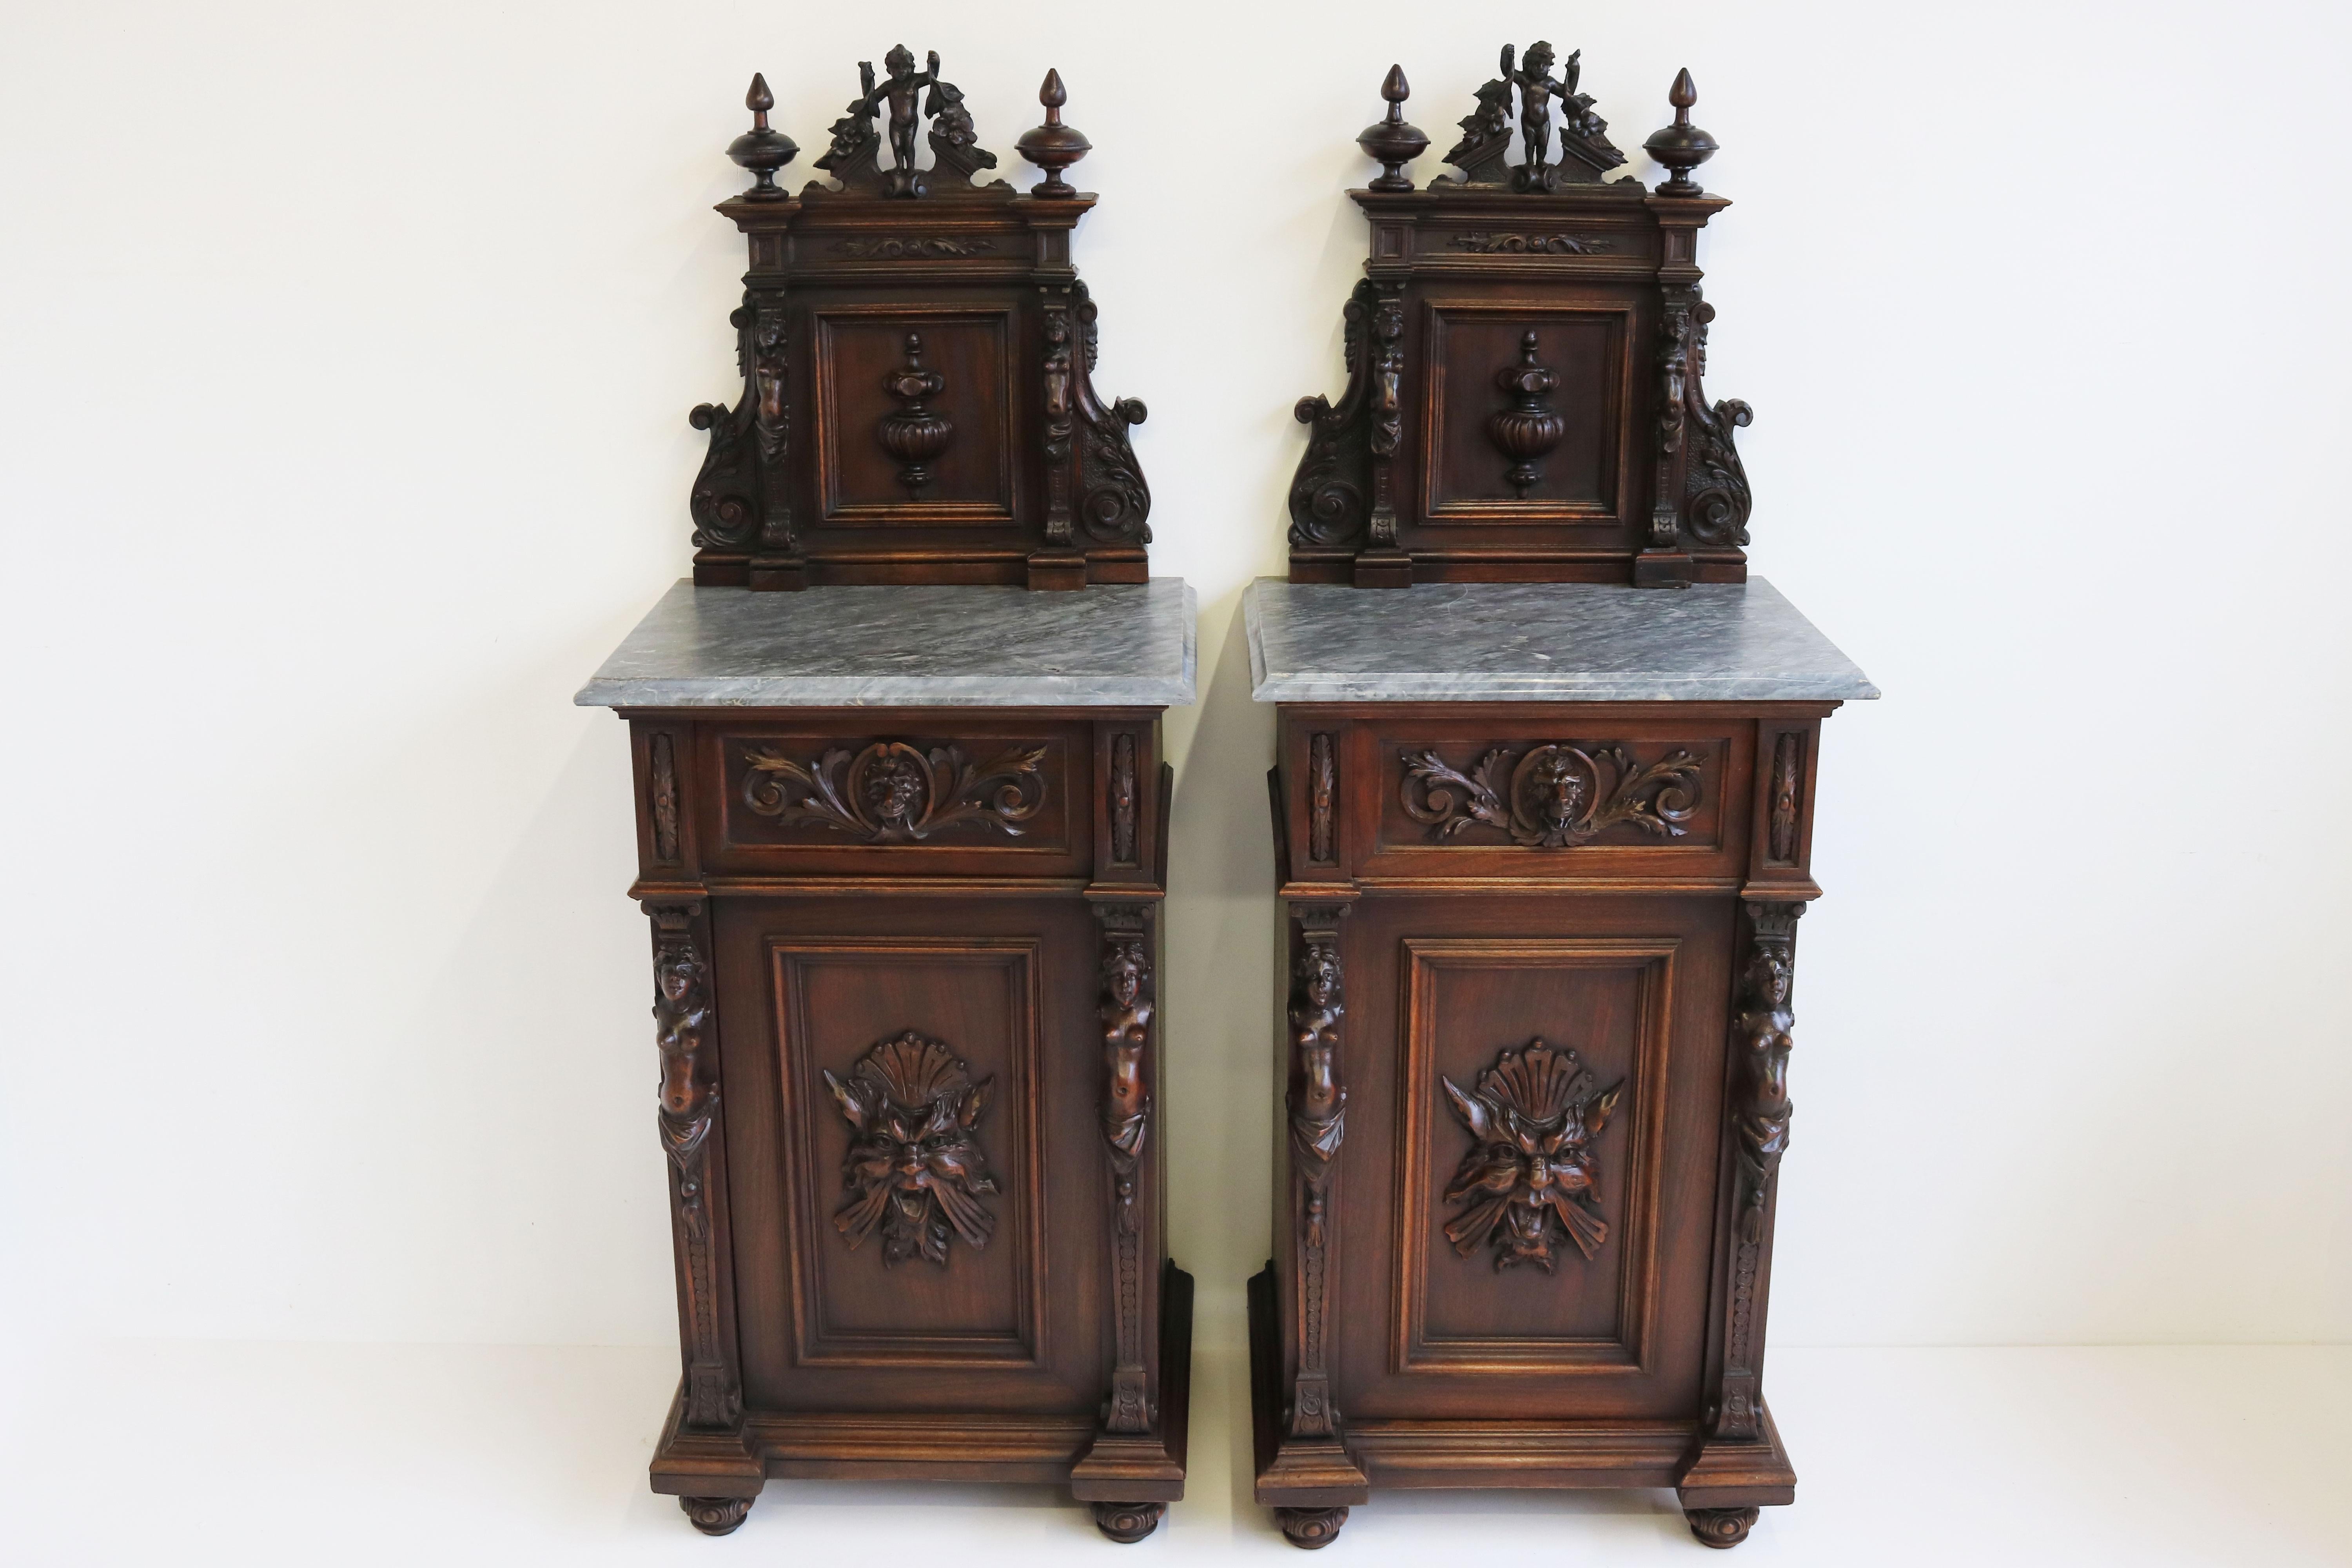 Hand-Carved Antique 19th Century Italian Renaissance Revival Bedside Tables / Nightstands For Sale